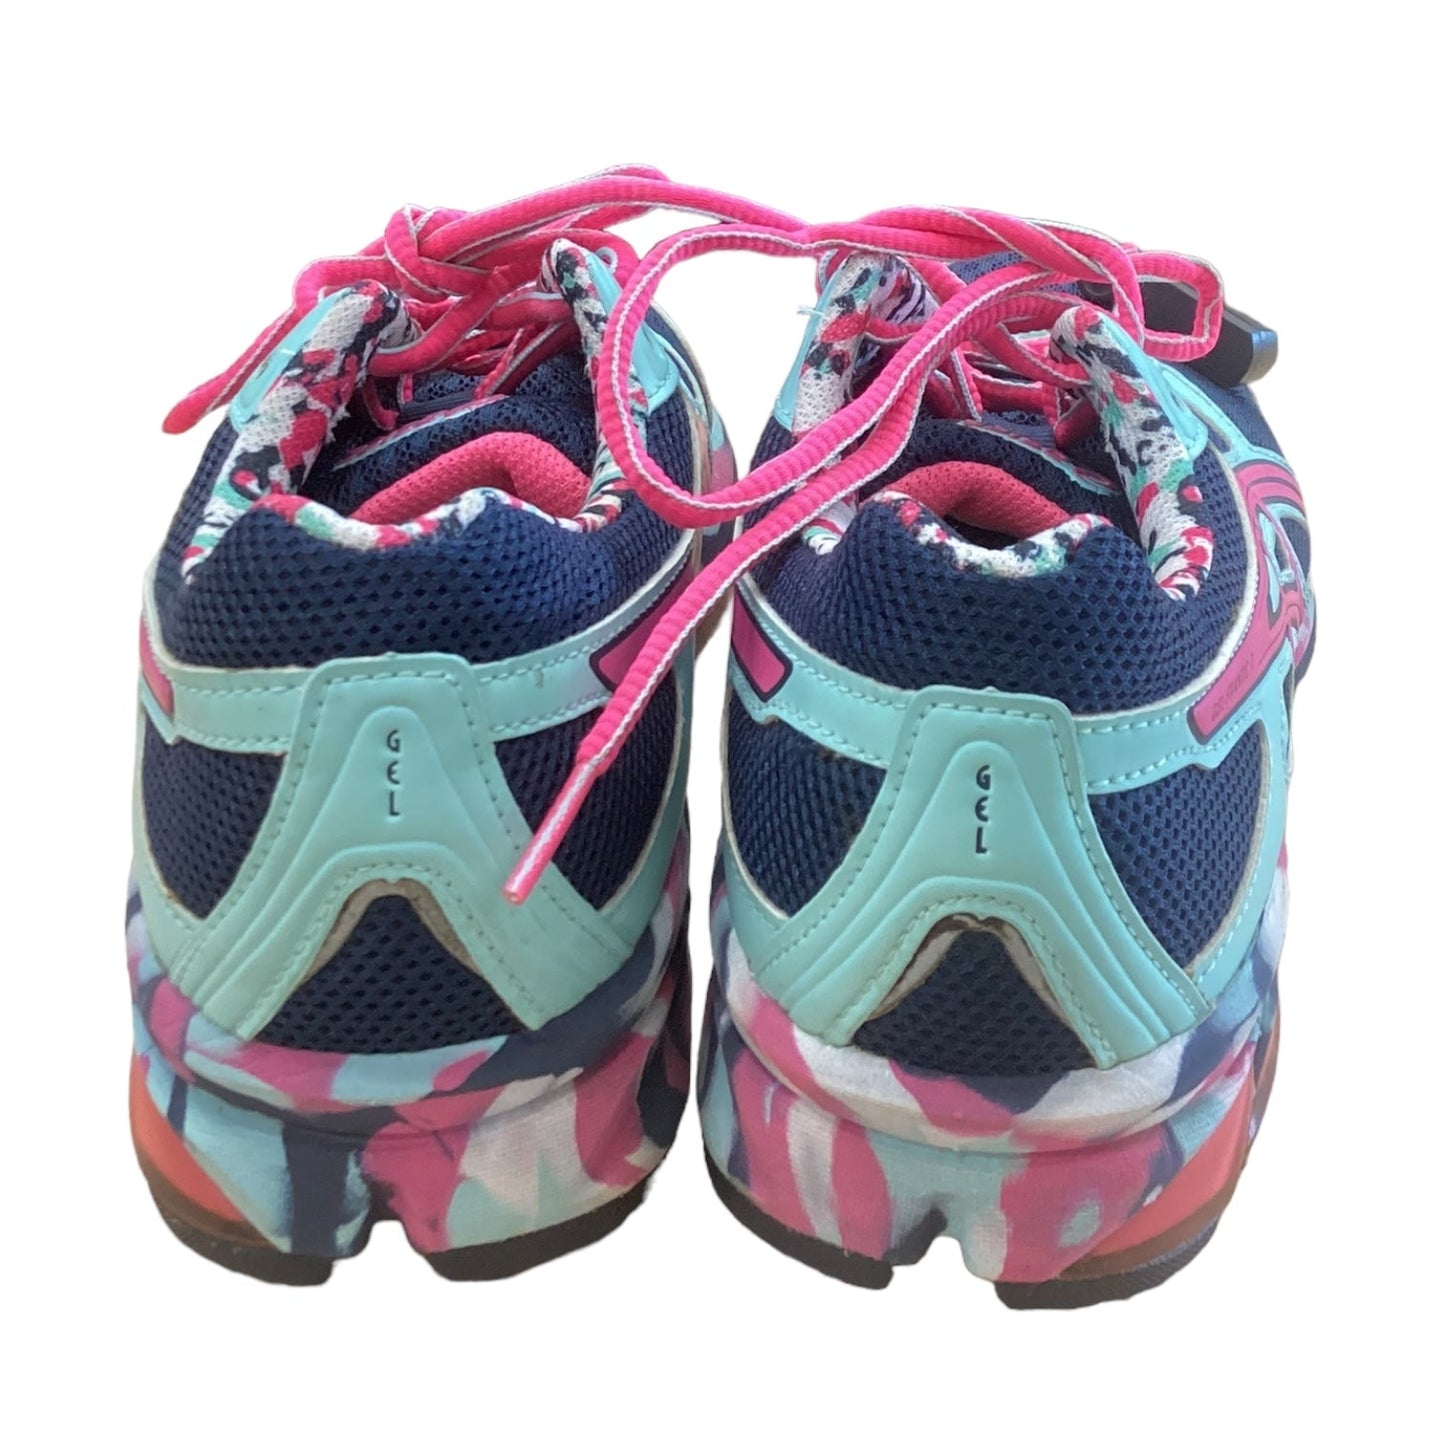 Blue & Pink Shoes Athletic Asics, Size 6.5